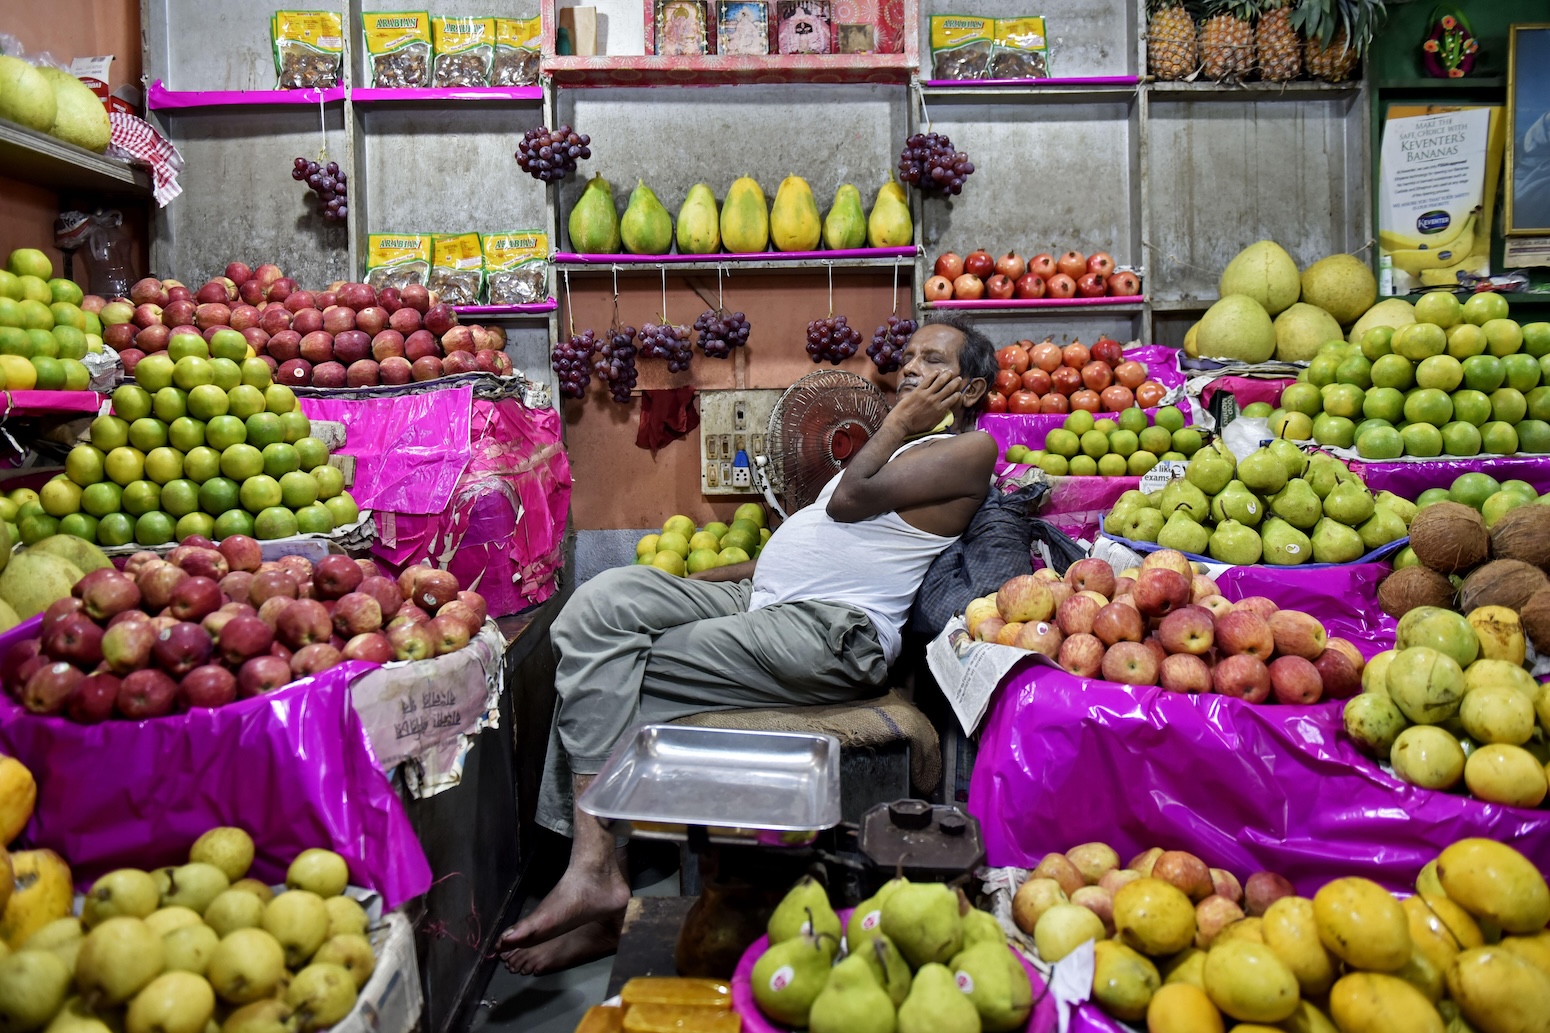 Experts: What is causing food prices to spike around the world?